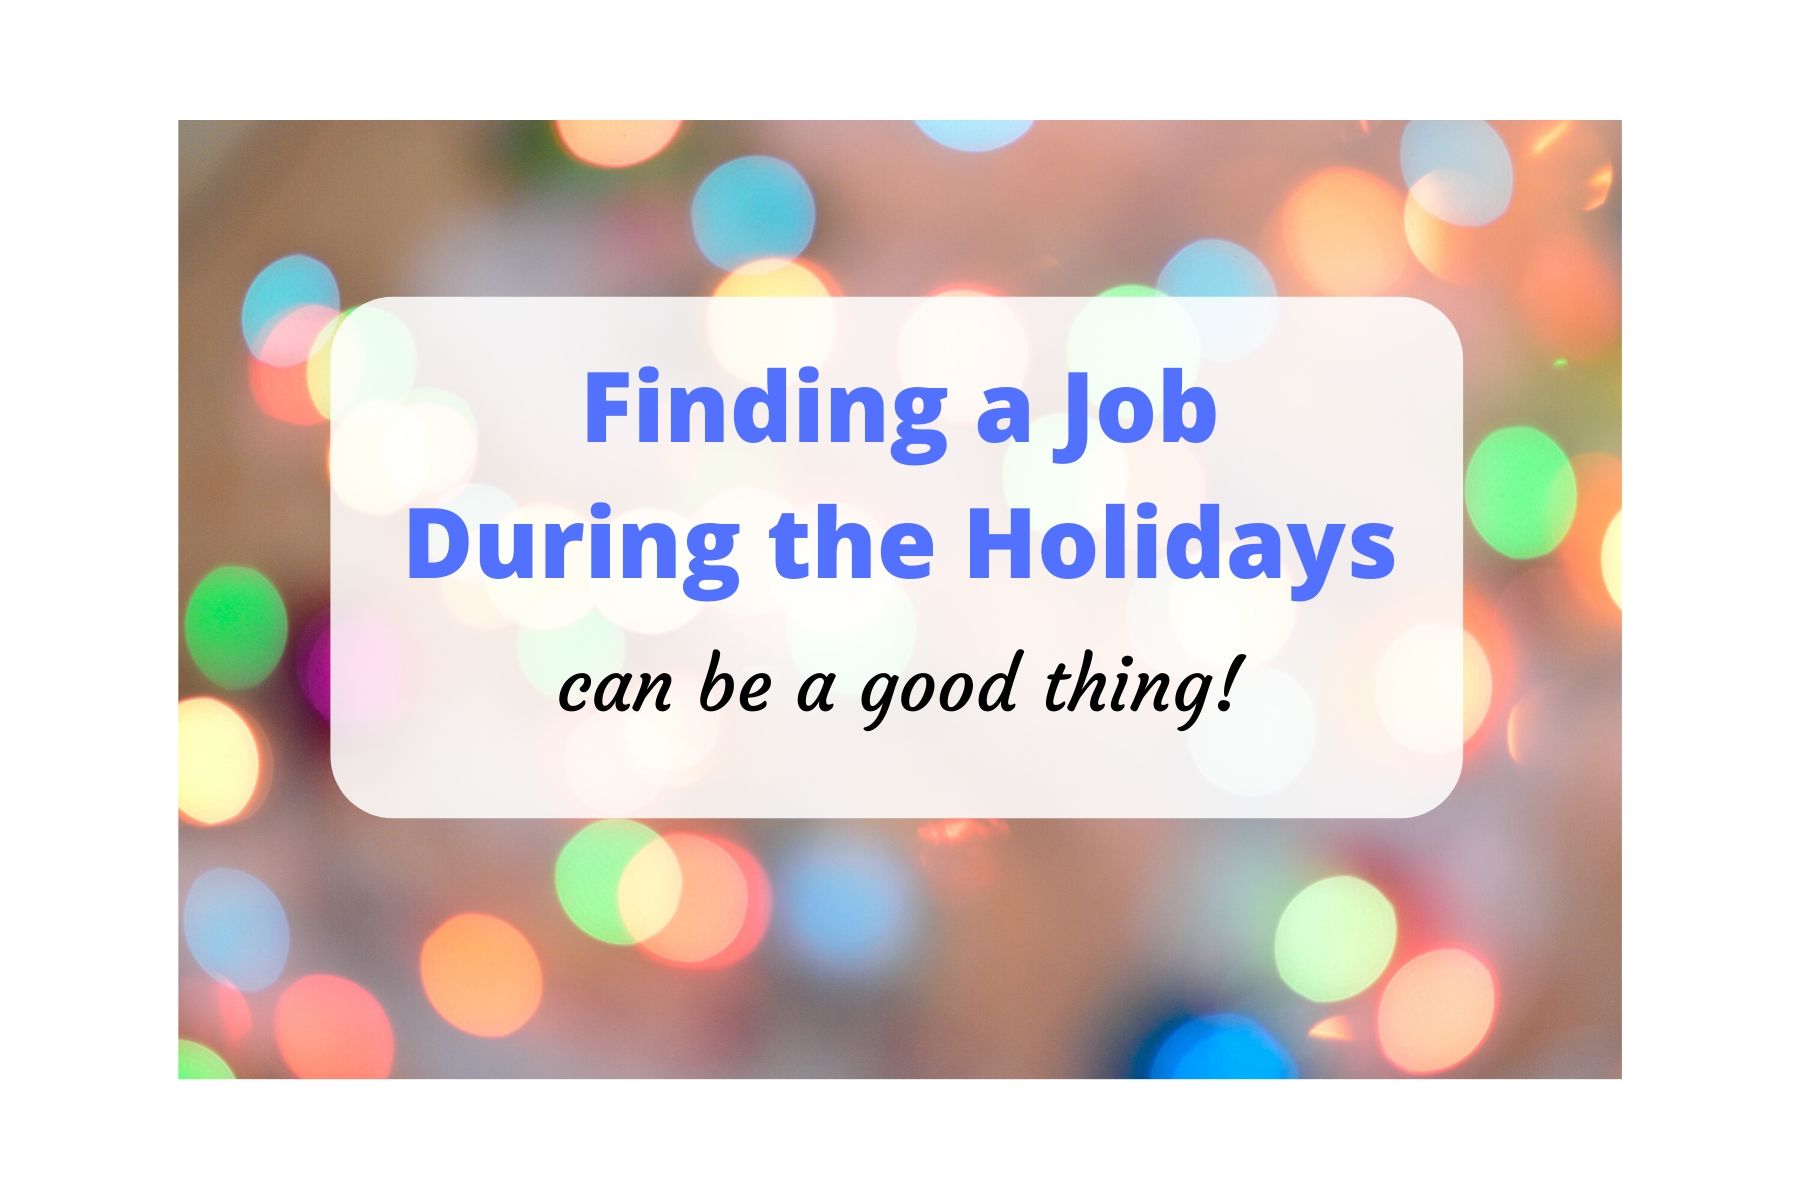 Image of holiday lights and a sign about finding a job